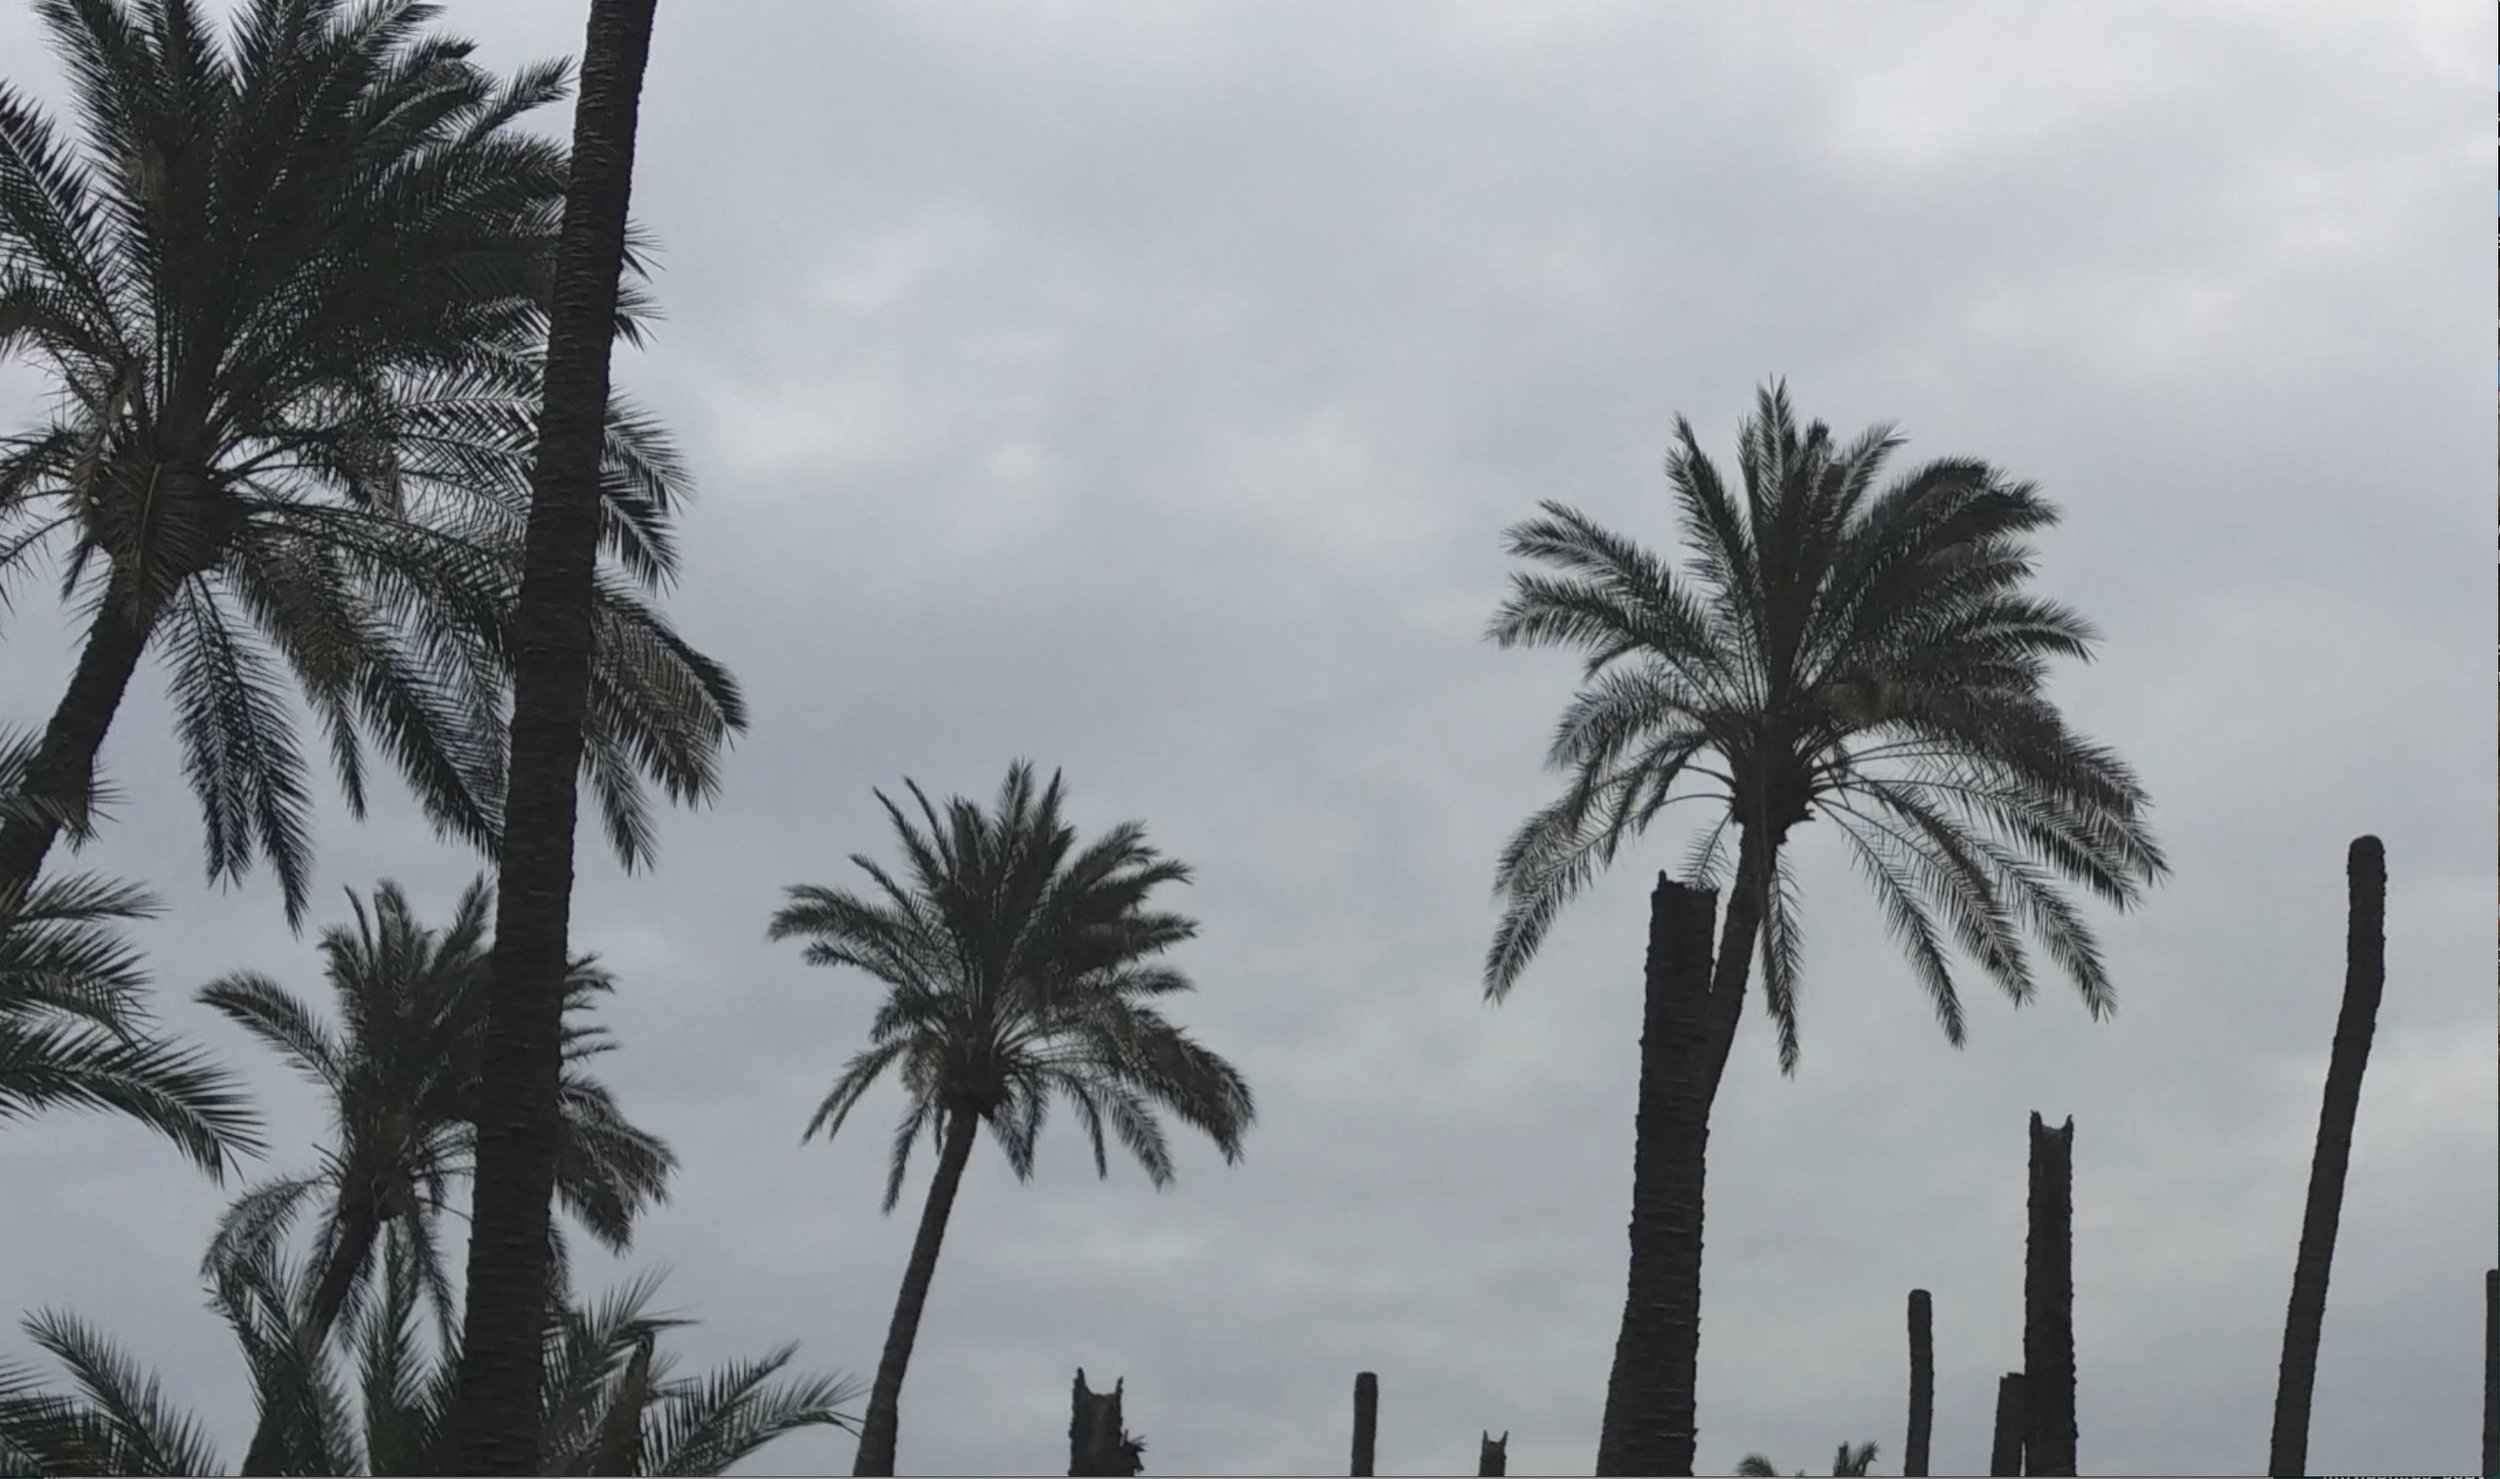   Deteriorated dates palms due to increased soil salinity and infestation by harmful pests   